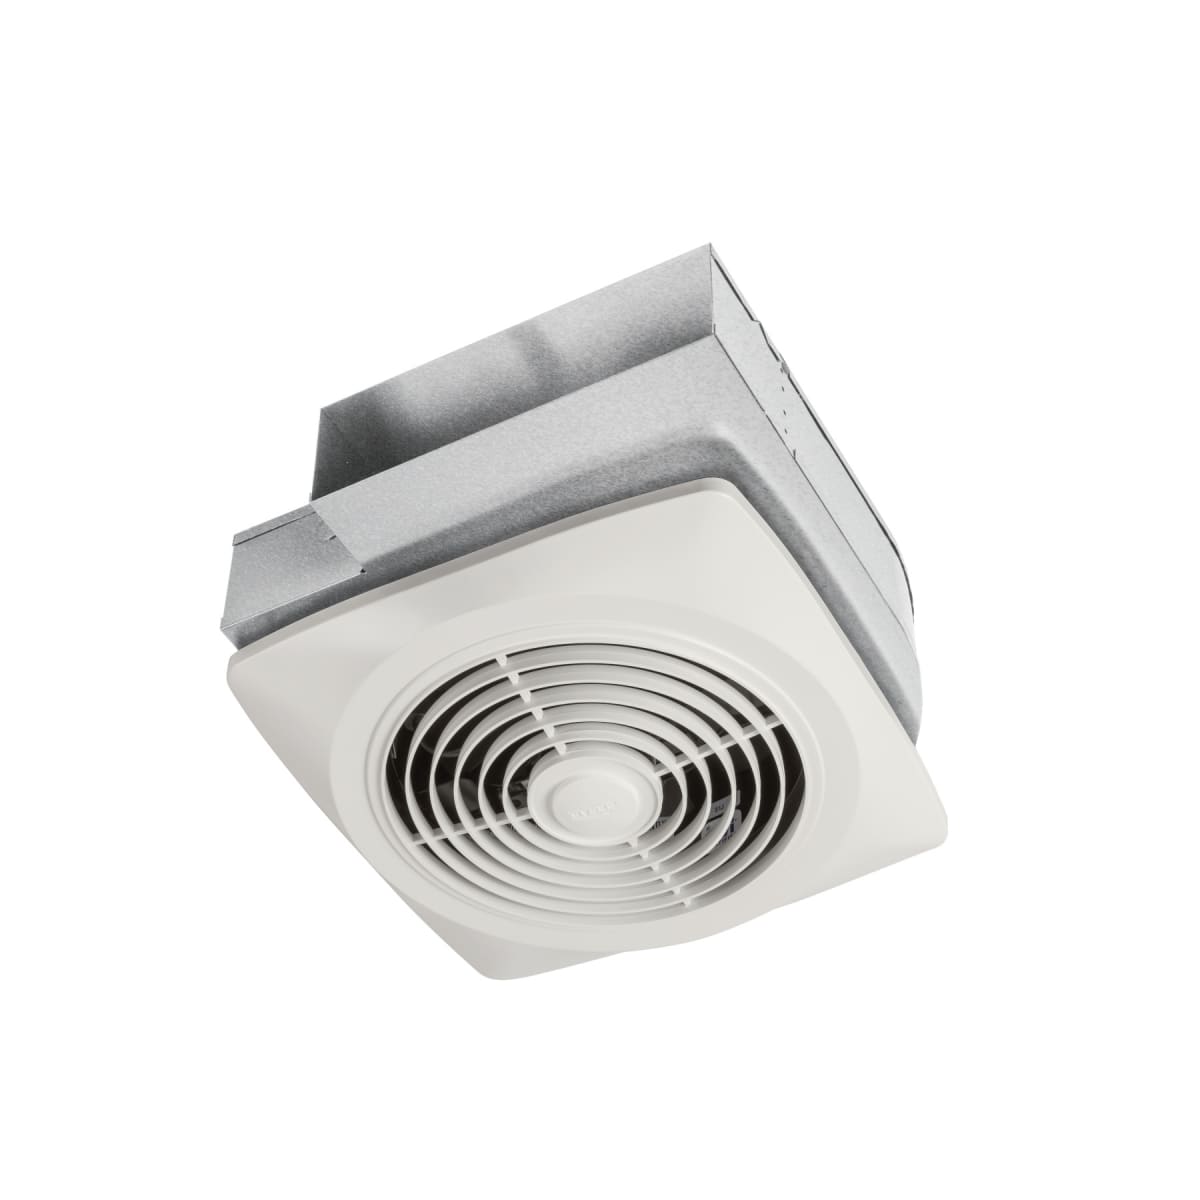 Broan 503 160 CFM Sone Ceiling or Wall Mounted Utility